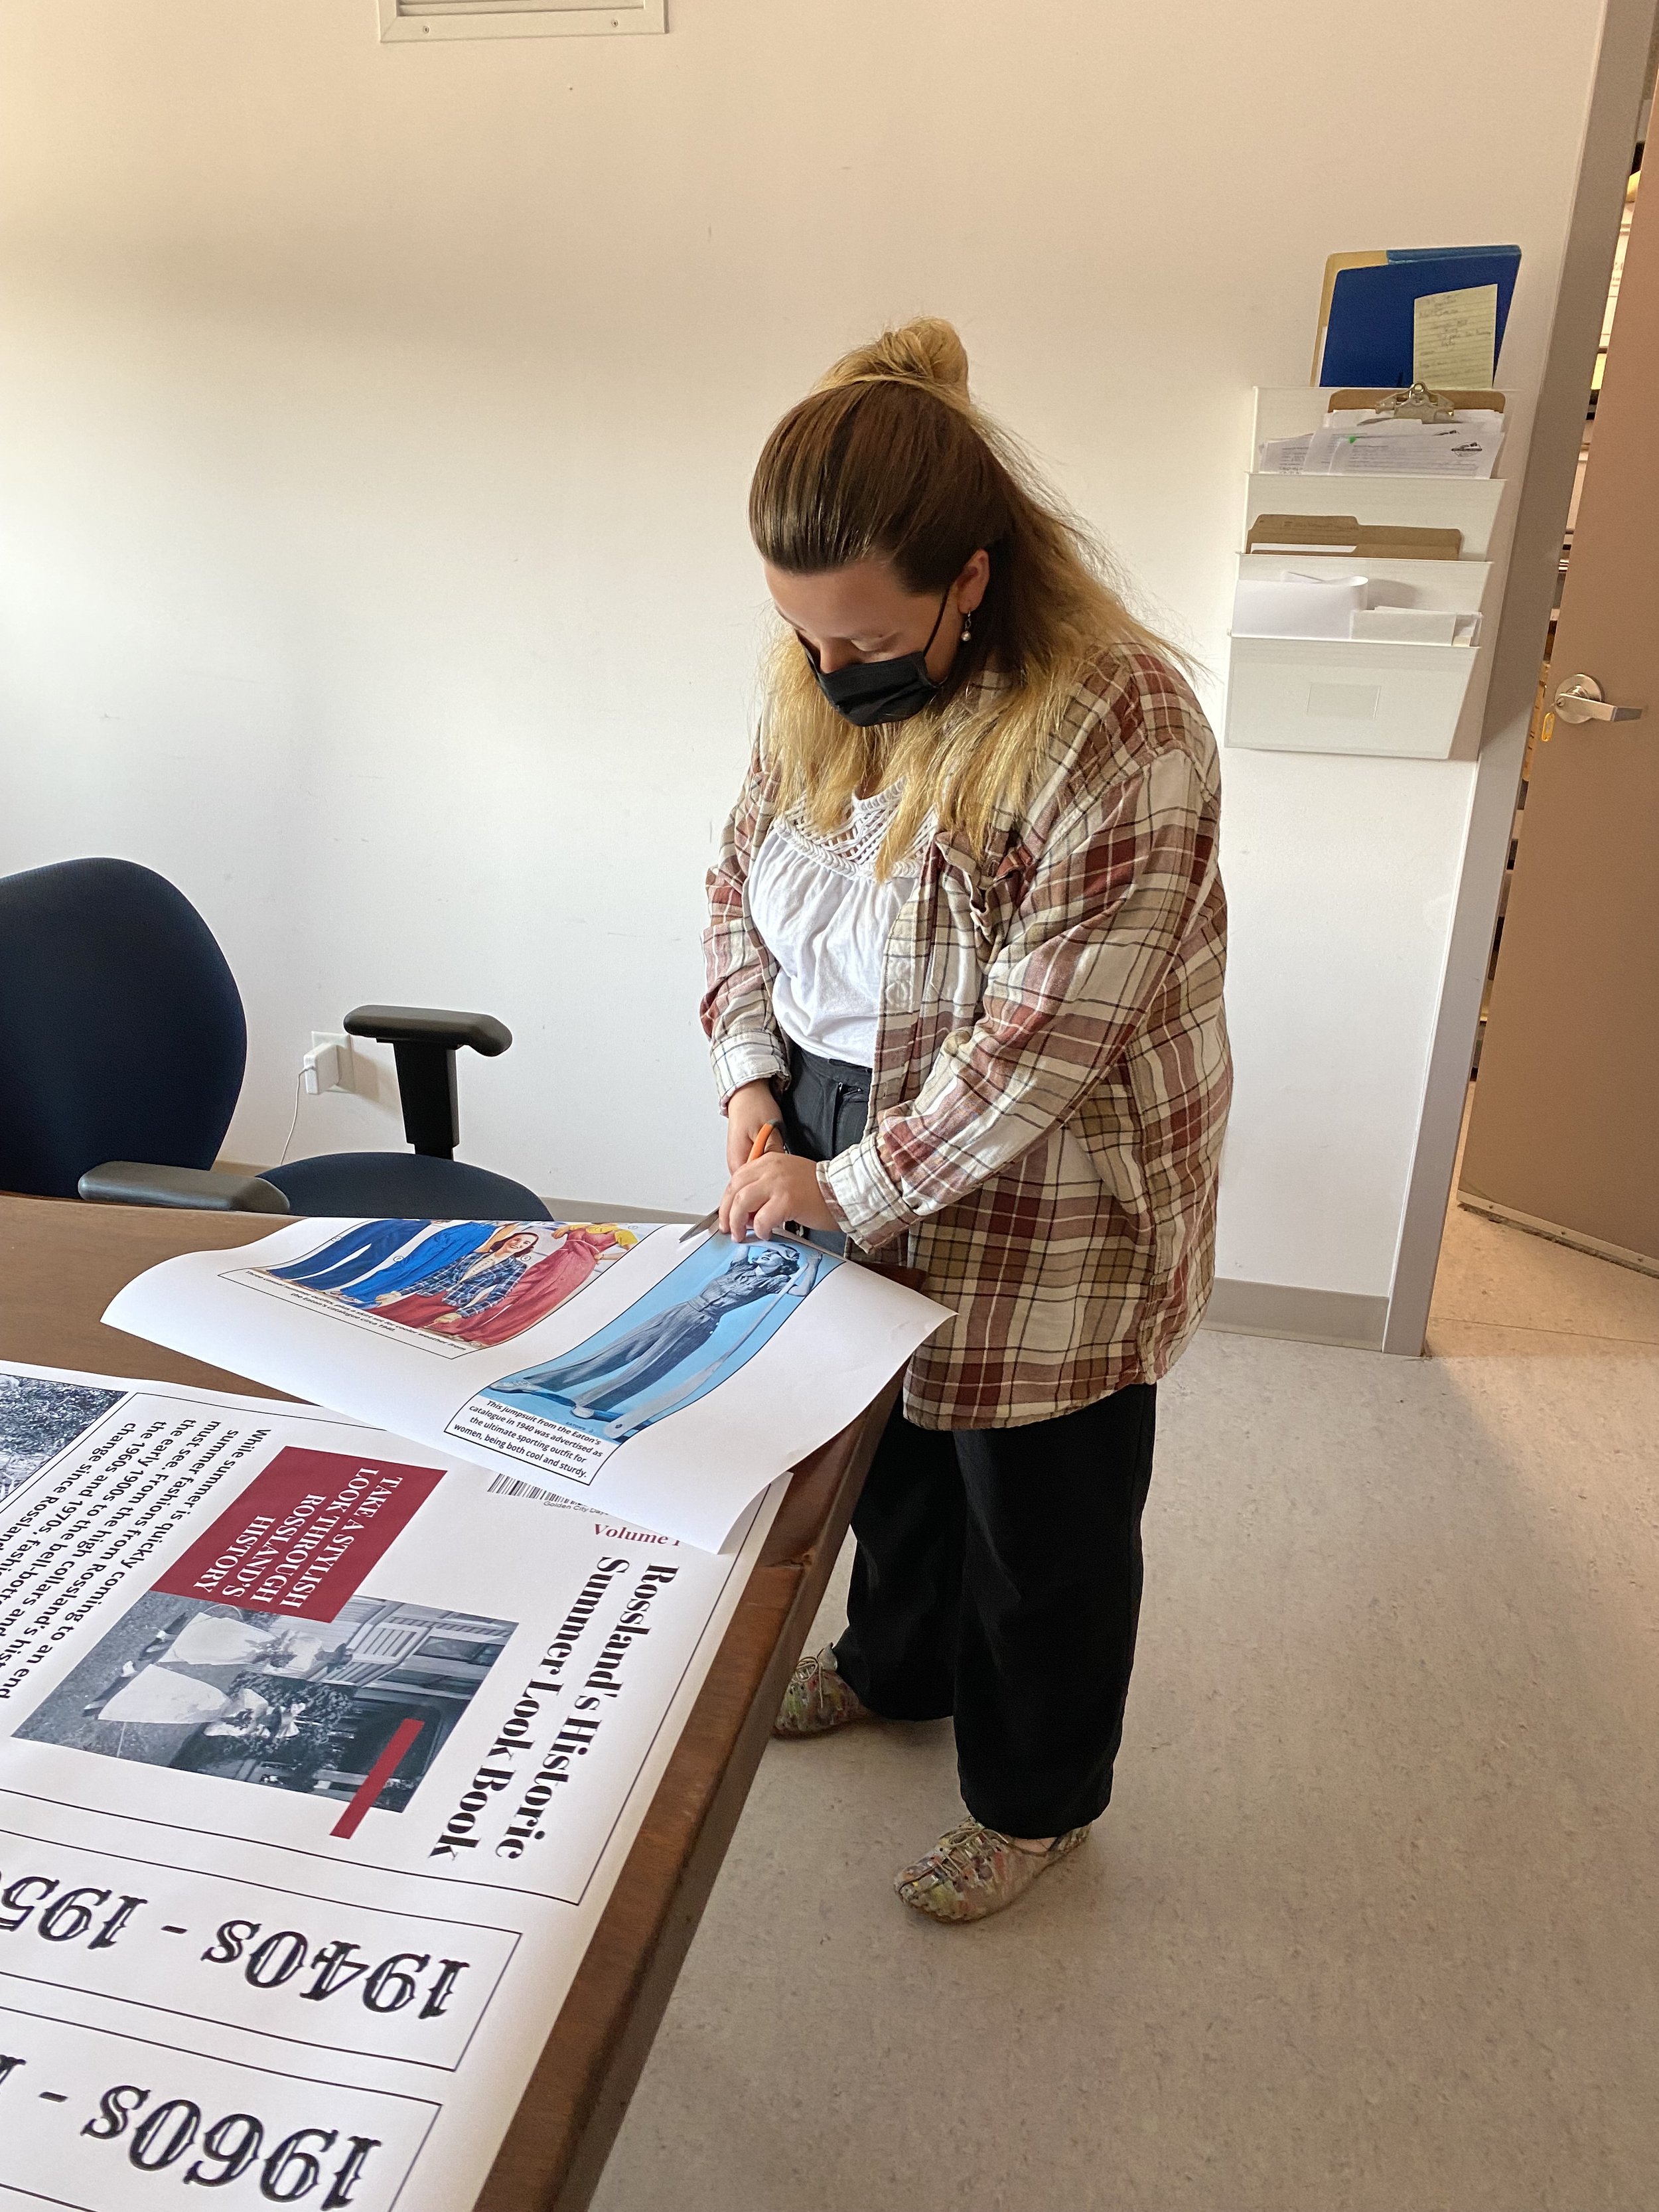 Archives/Collections Assistant Kestra prepping panels